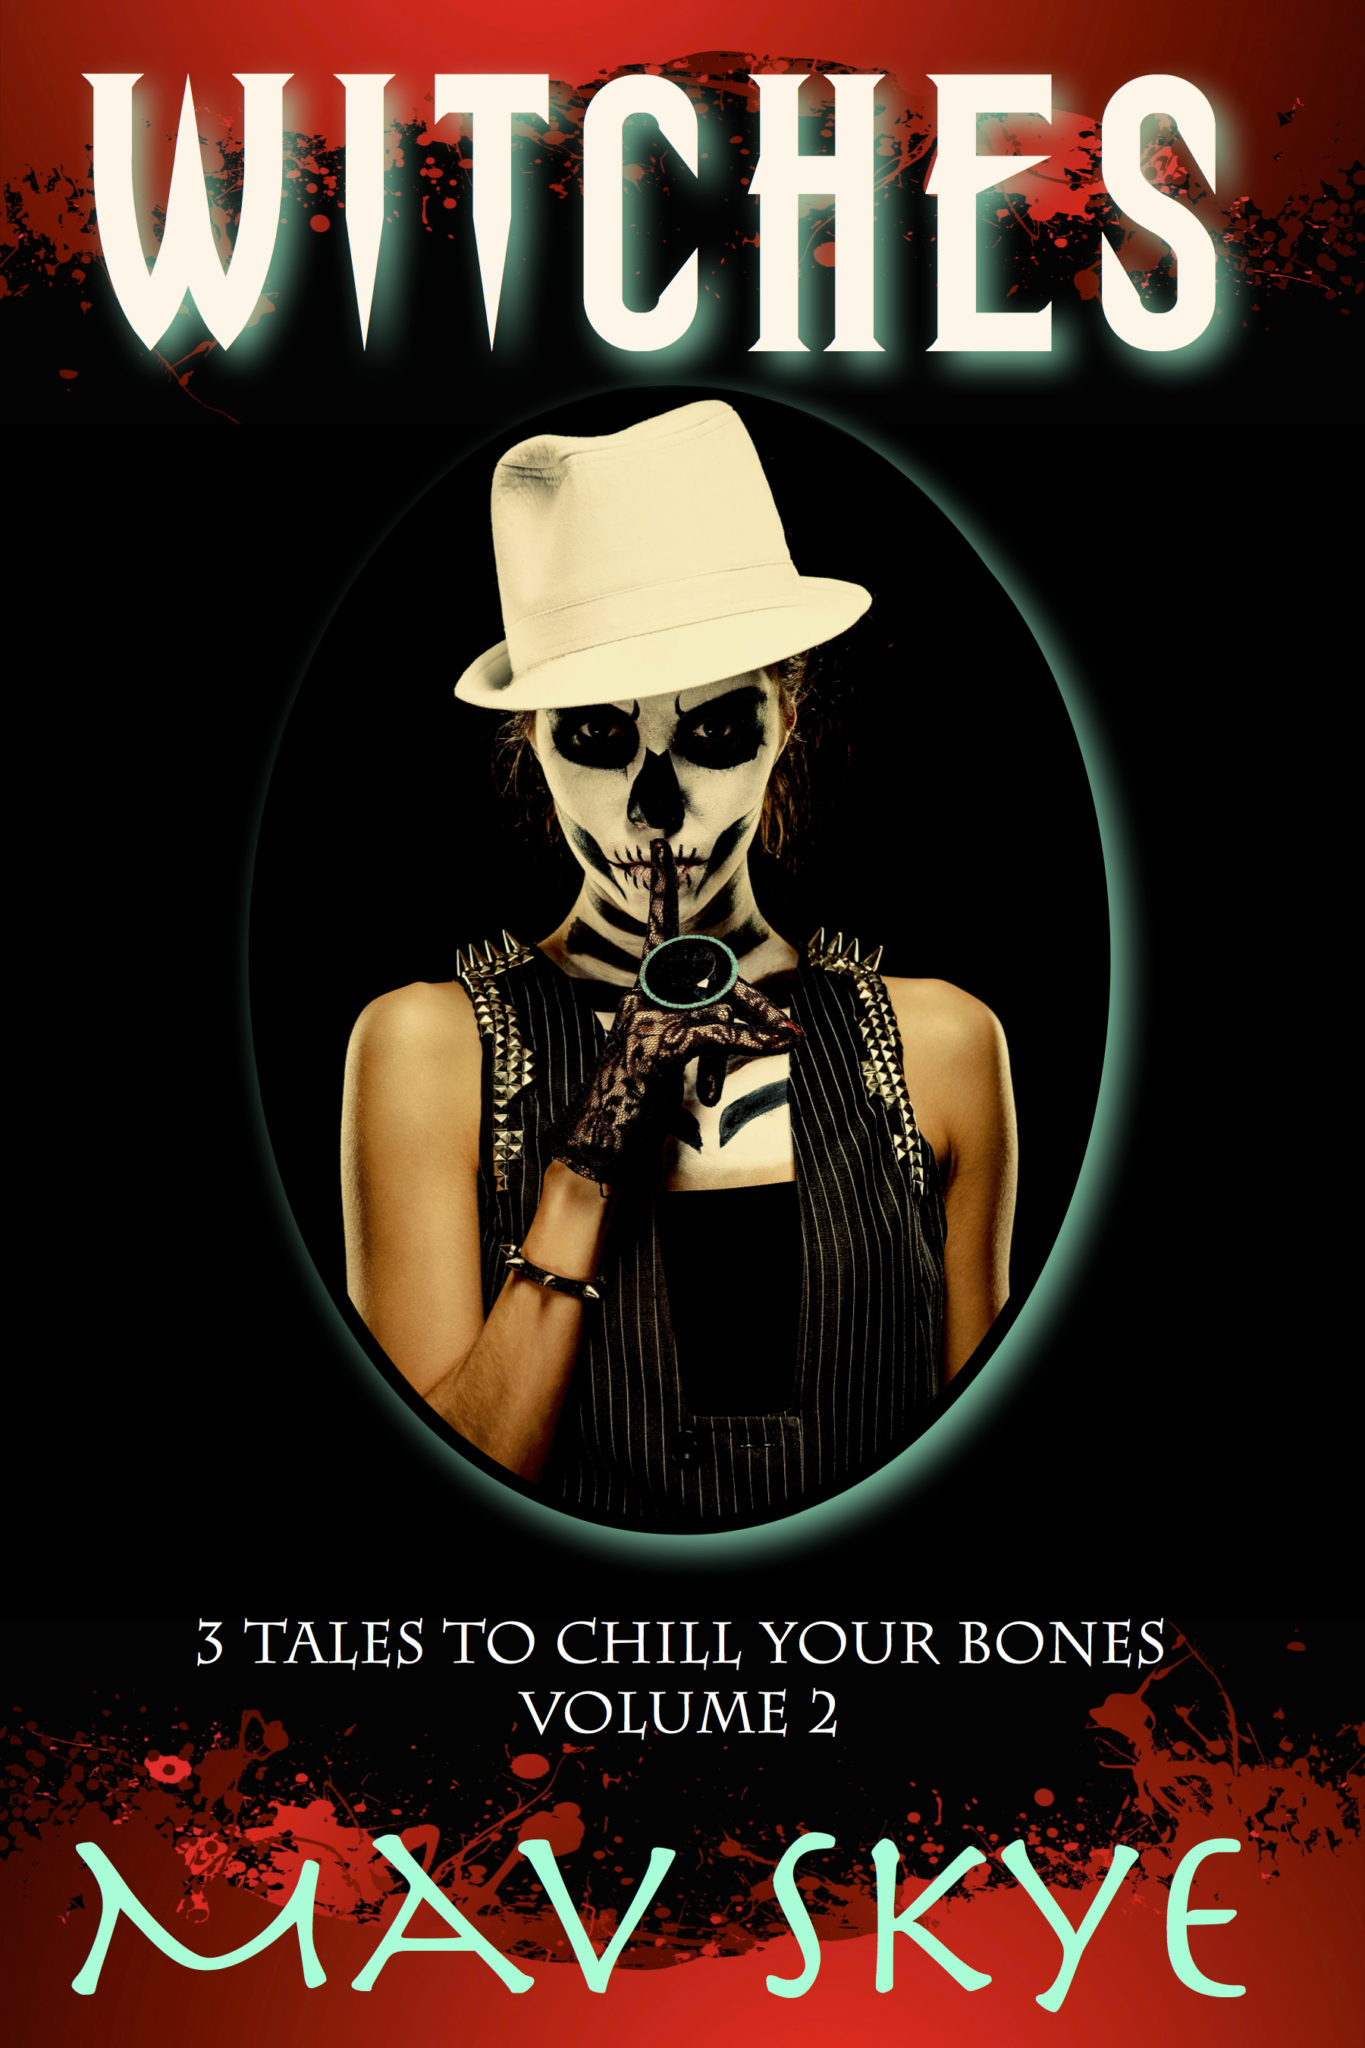 FREE: Witches, Volume Two of 3 Tales to Chill Your Bones by Mav Skye